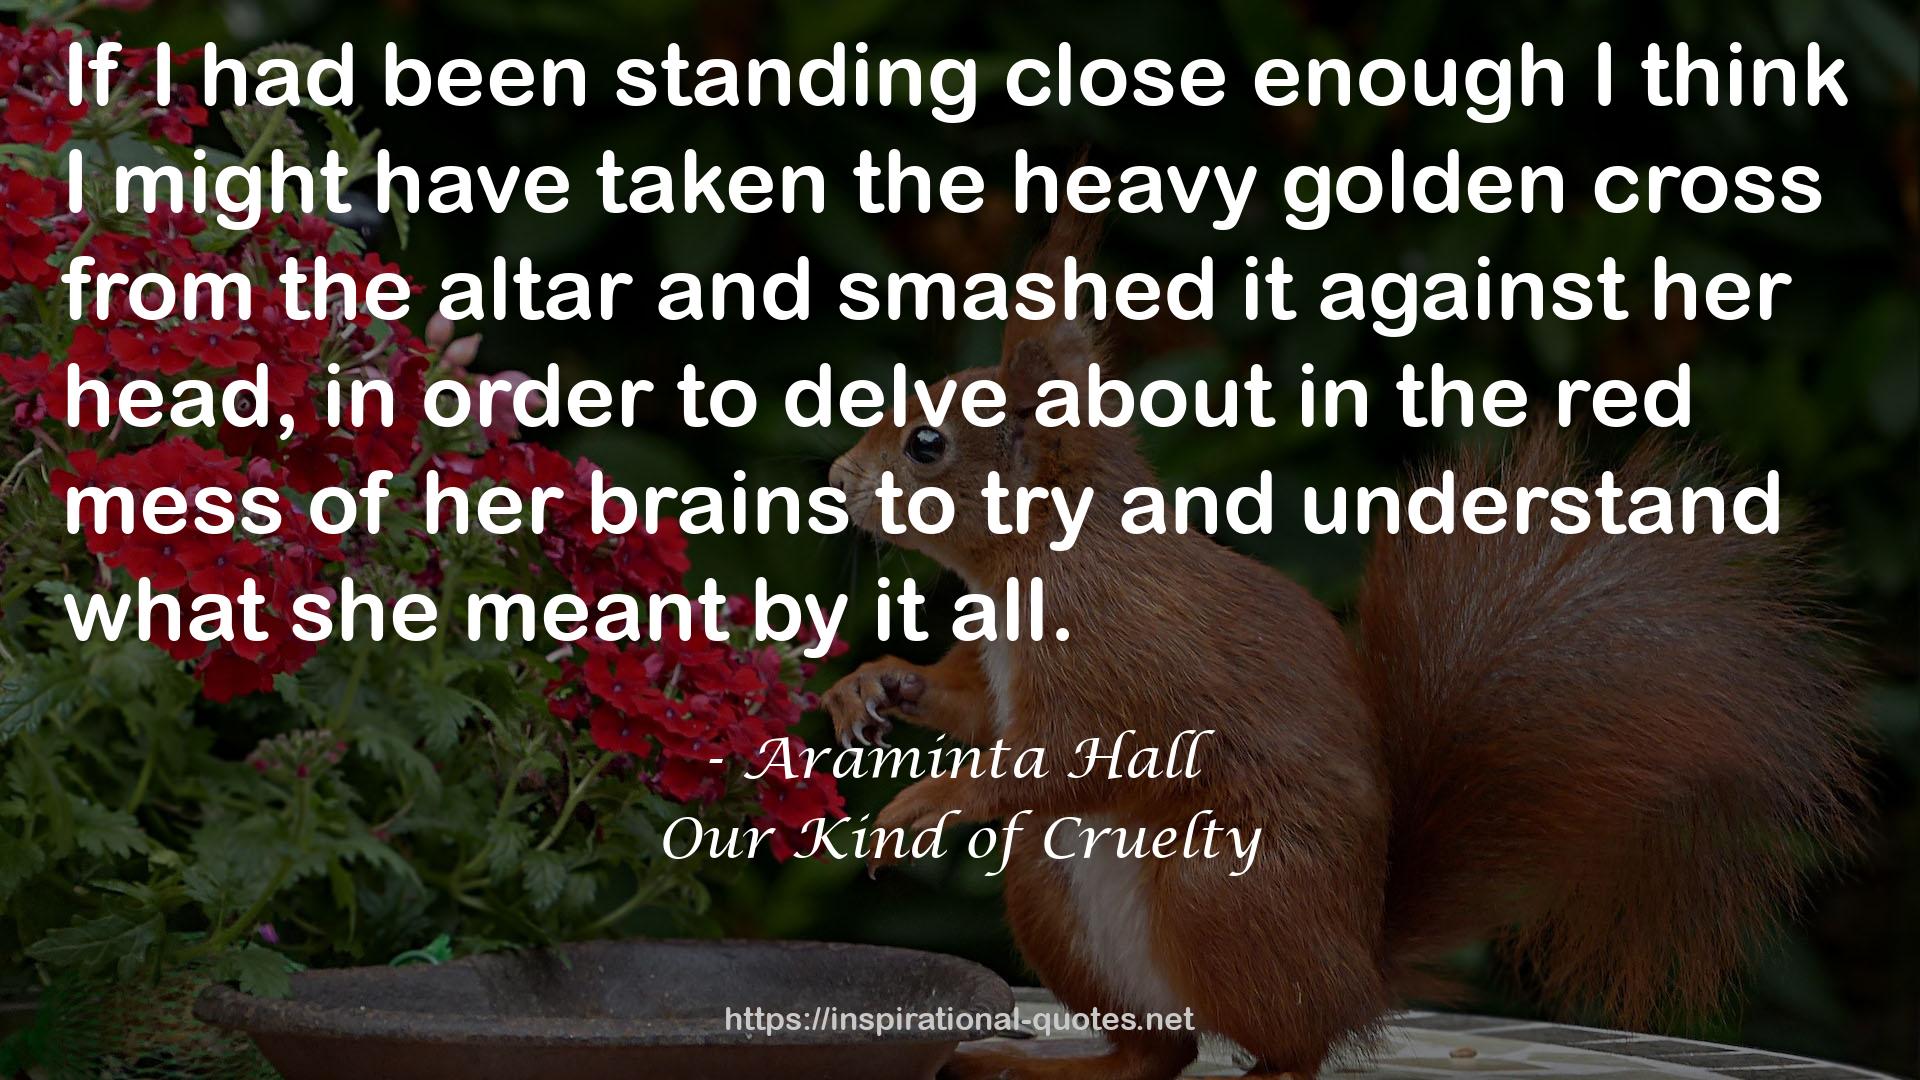 Our Kind of Cruelty QUOTES